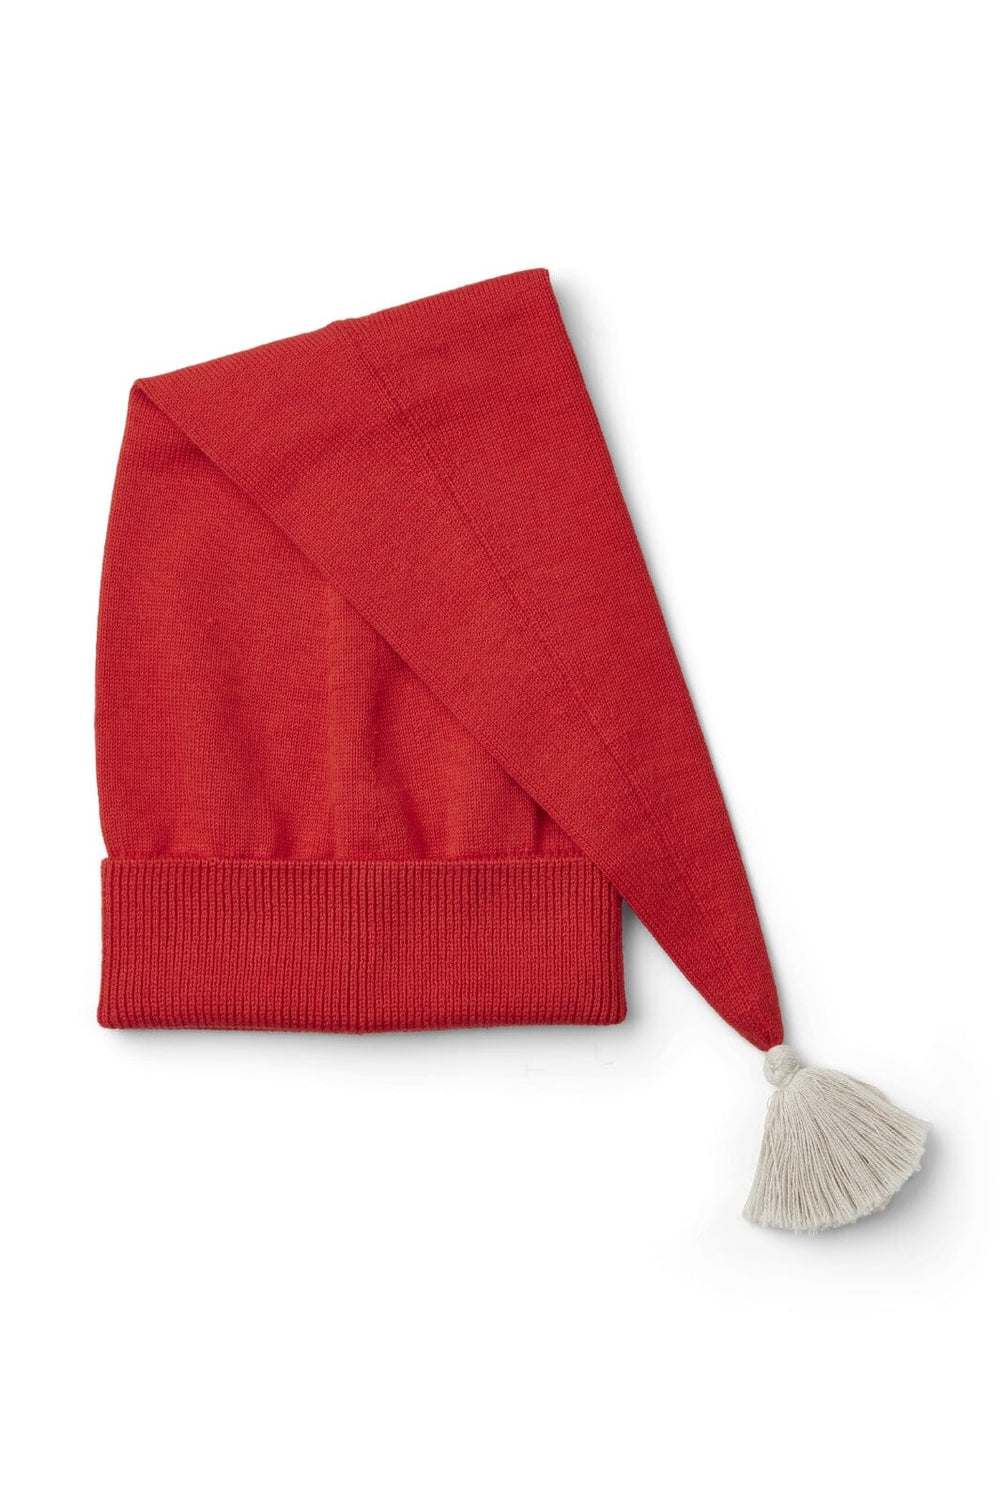 Liewood - Alf Christmas Hat - Apple Red Nissehuer 